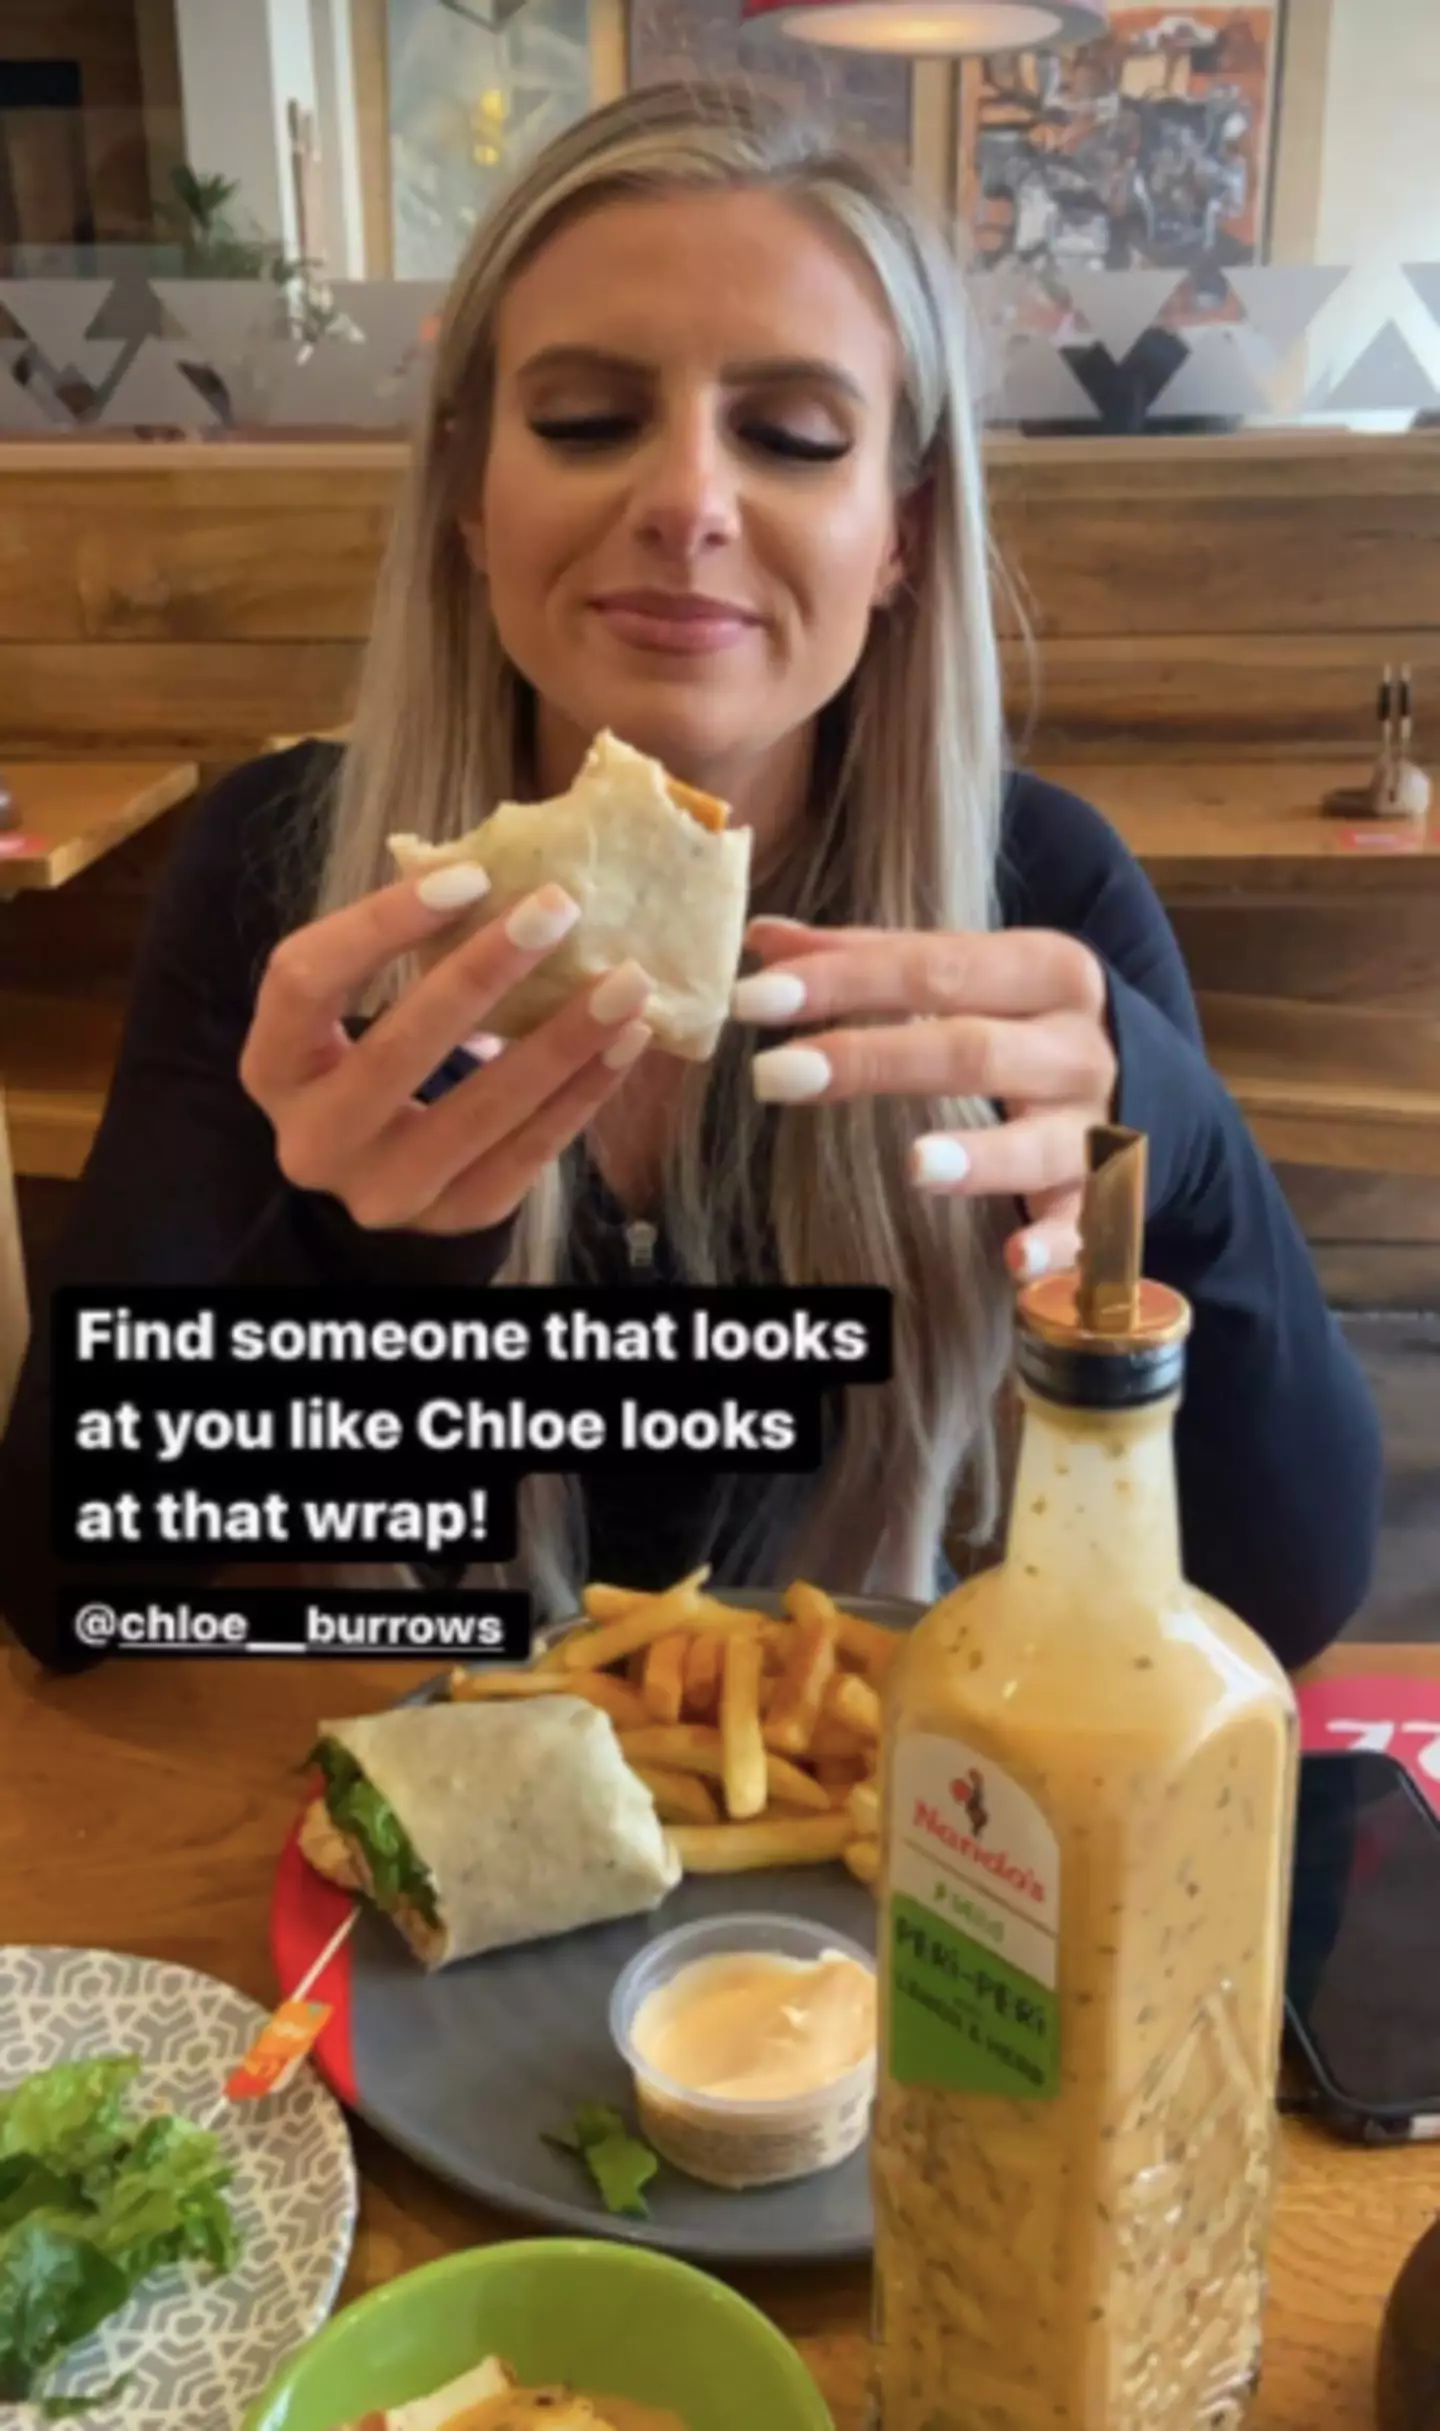 The couple had their first date at Nando's (